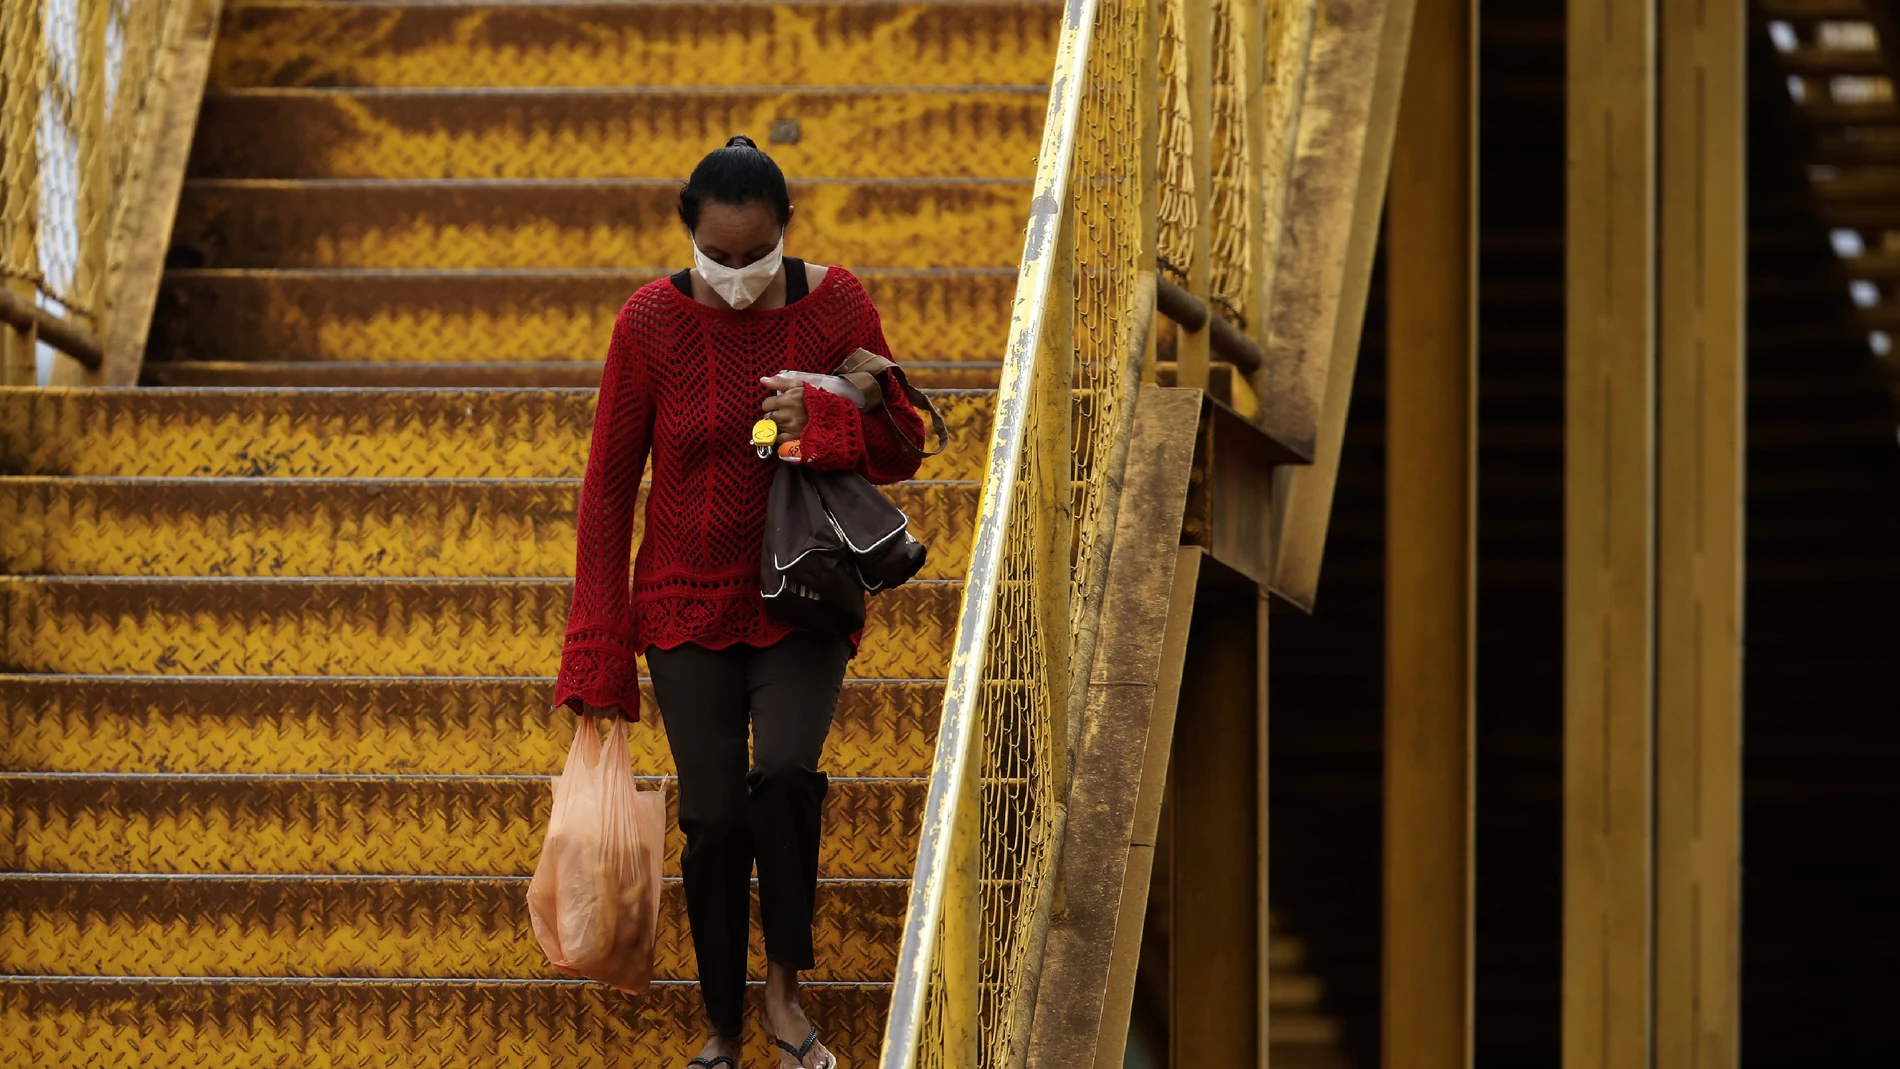 A woman wearing a mask against the spread of the new coronavirus walks down a set of stairs in Valparaiso, Brazil, Wednesday, May 20, 2020. Valparaiso, 40 km. from Brasilia, appears in the statistics as one of the cities in the state of Goias with a high incidence of COVID-19. (AP Photo/Eraldo Peres)